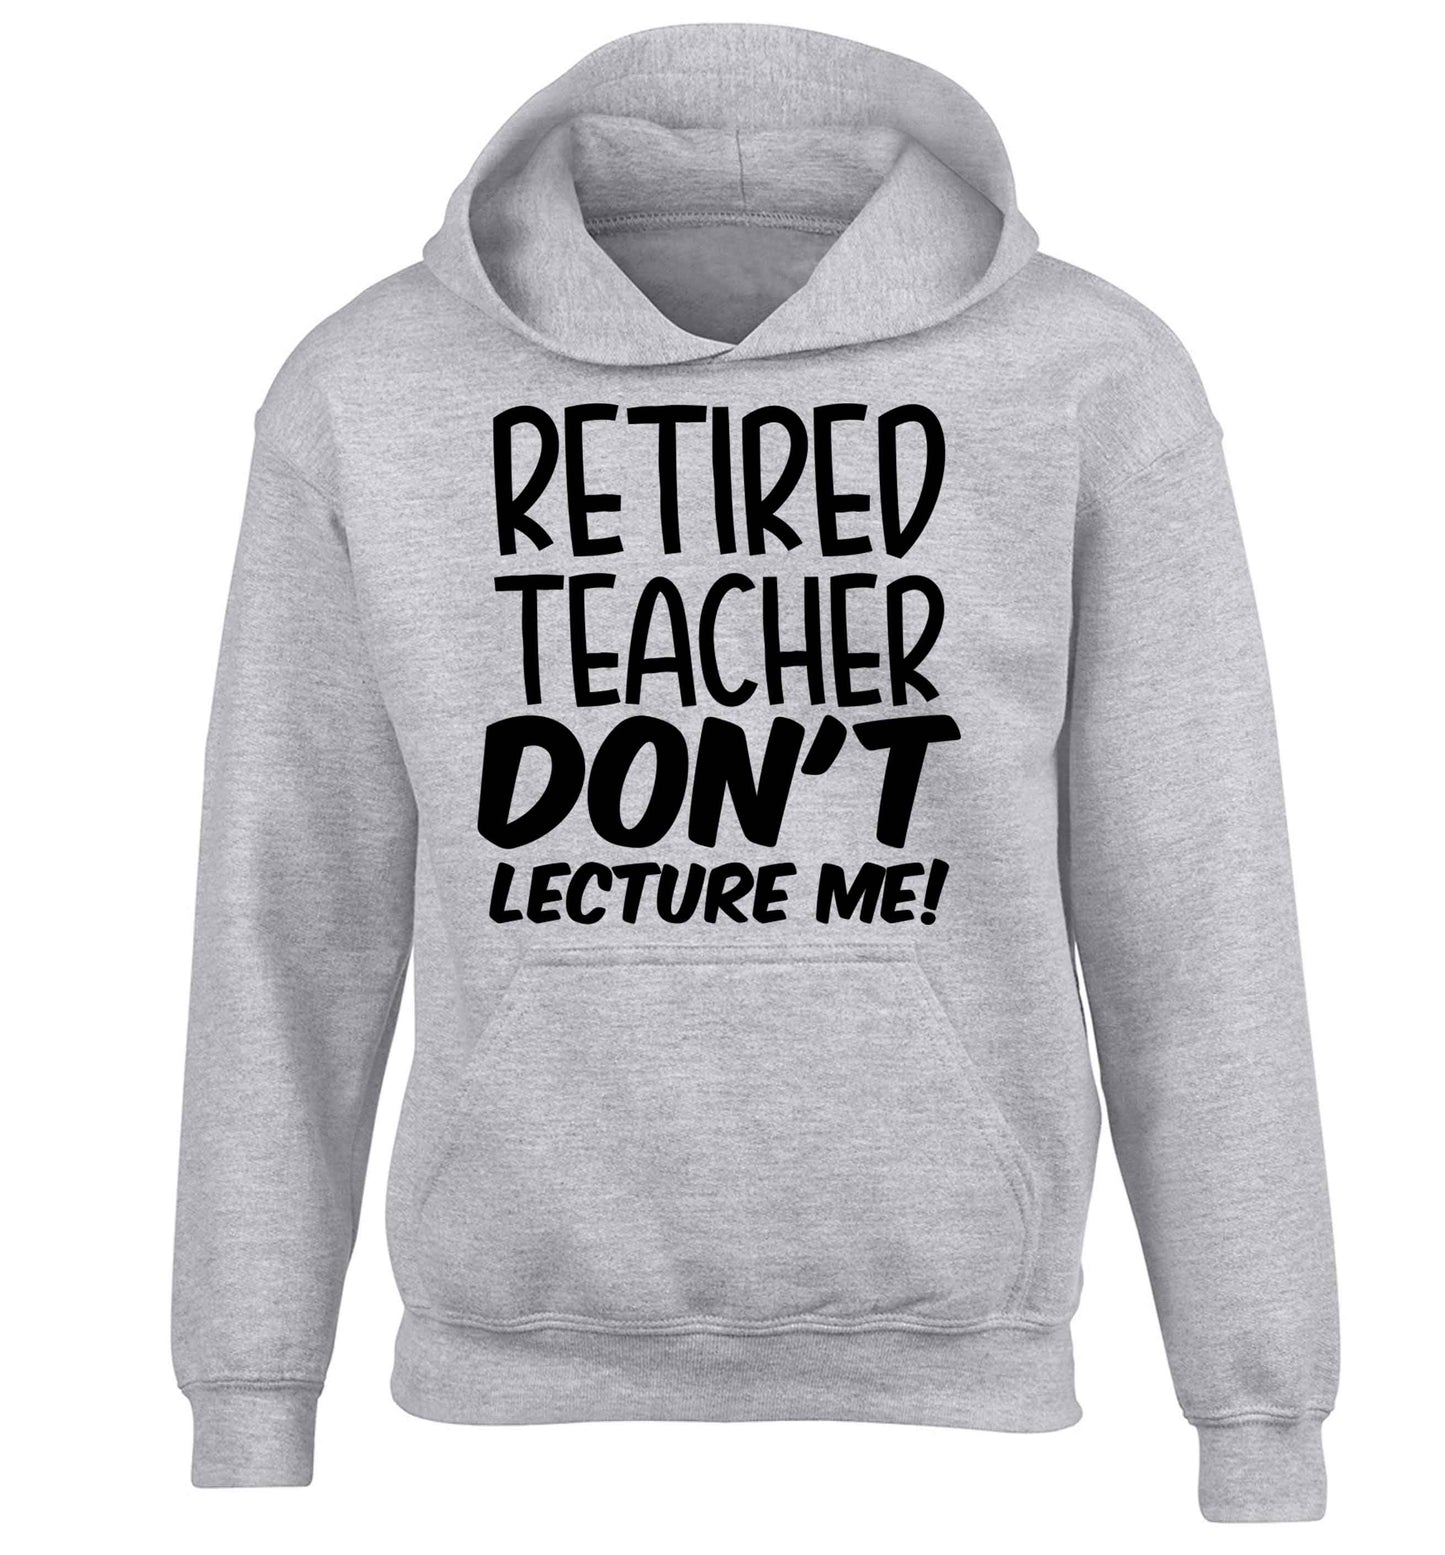 Retired teacher don't lecture me! children's grey hoodie 12-13 Years